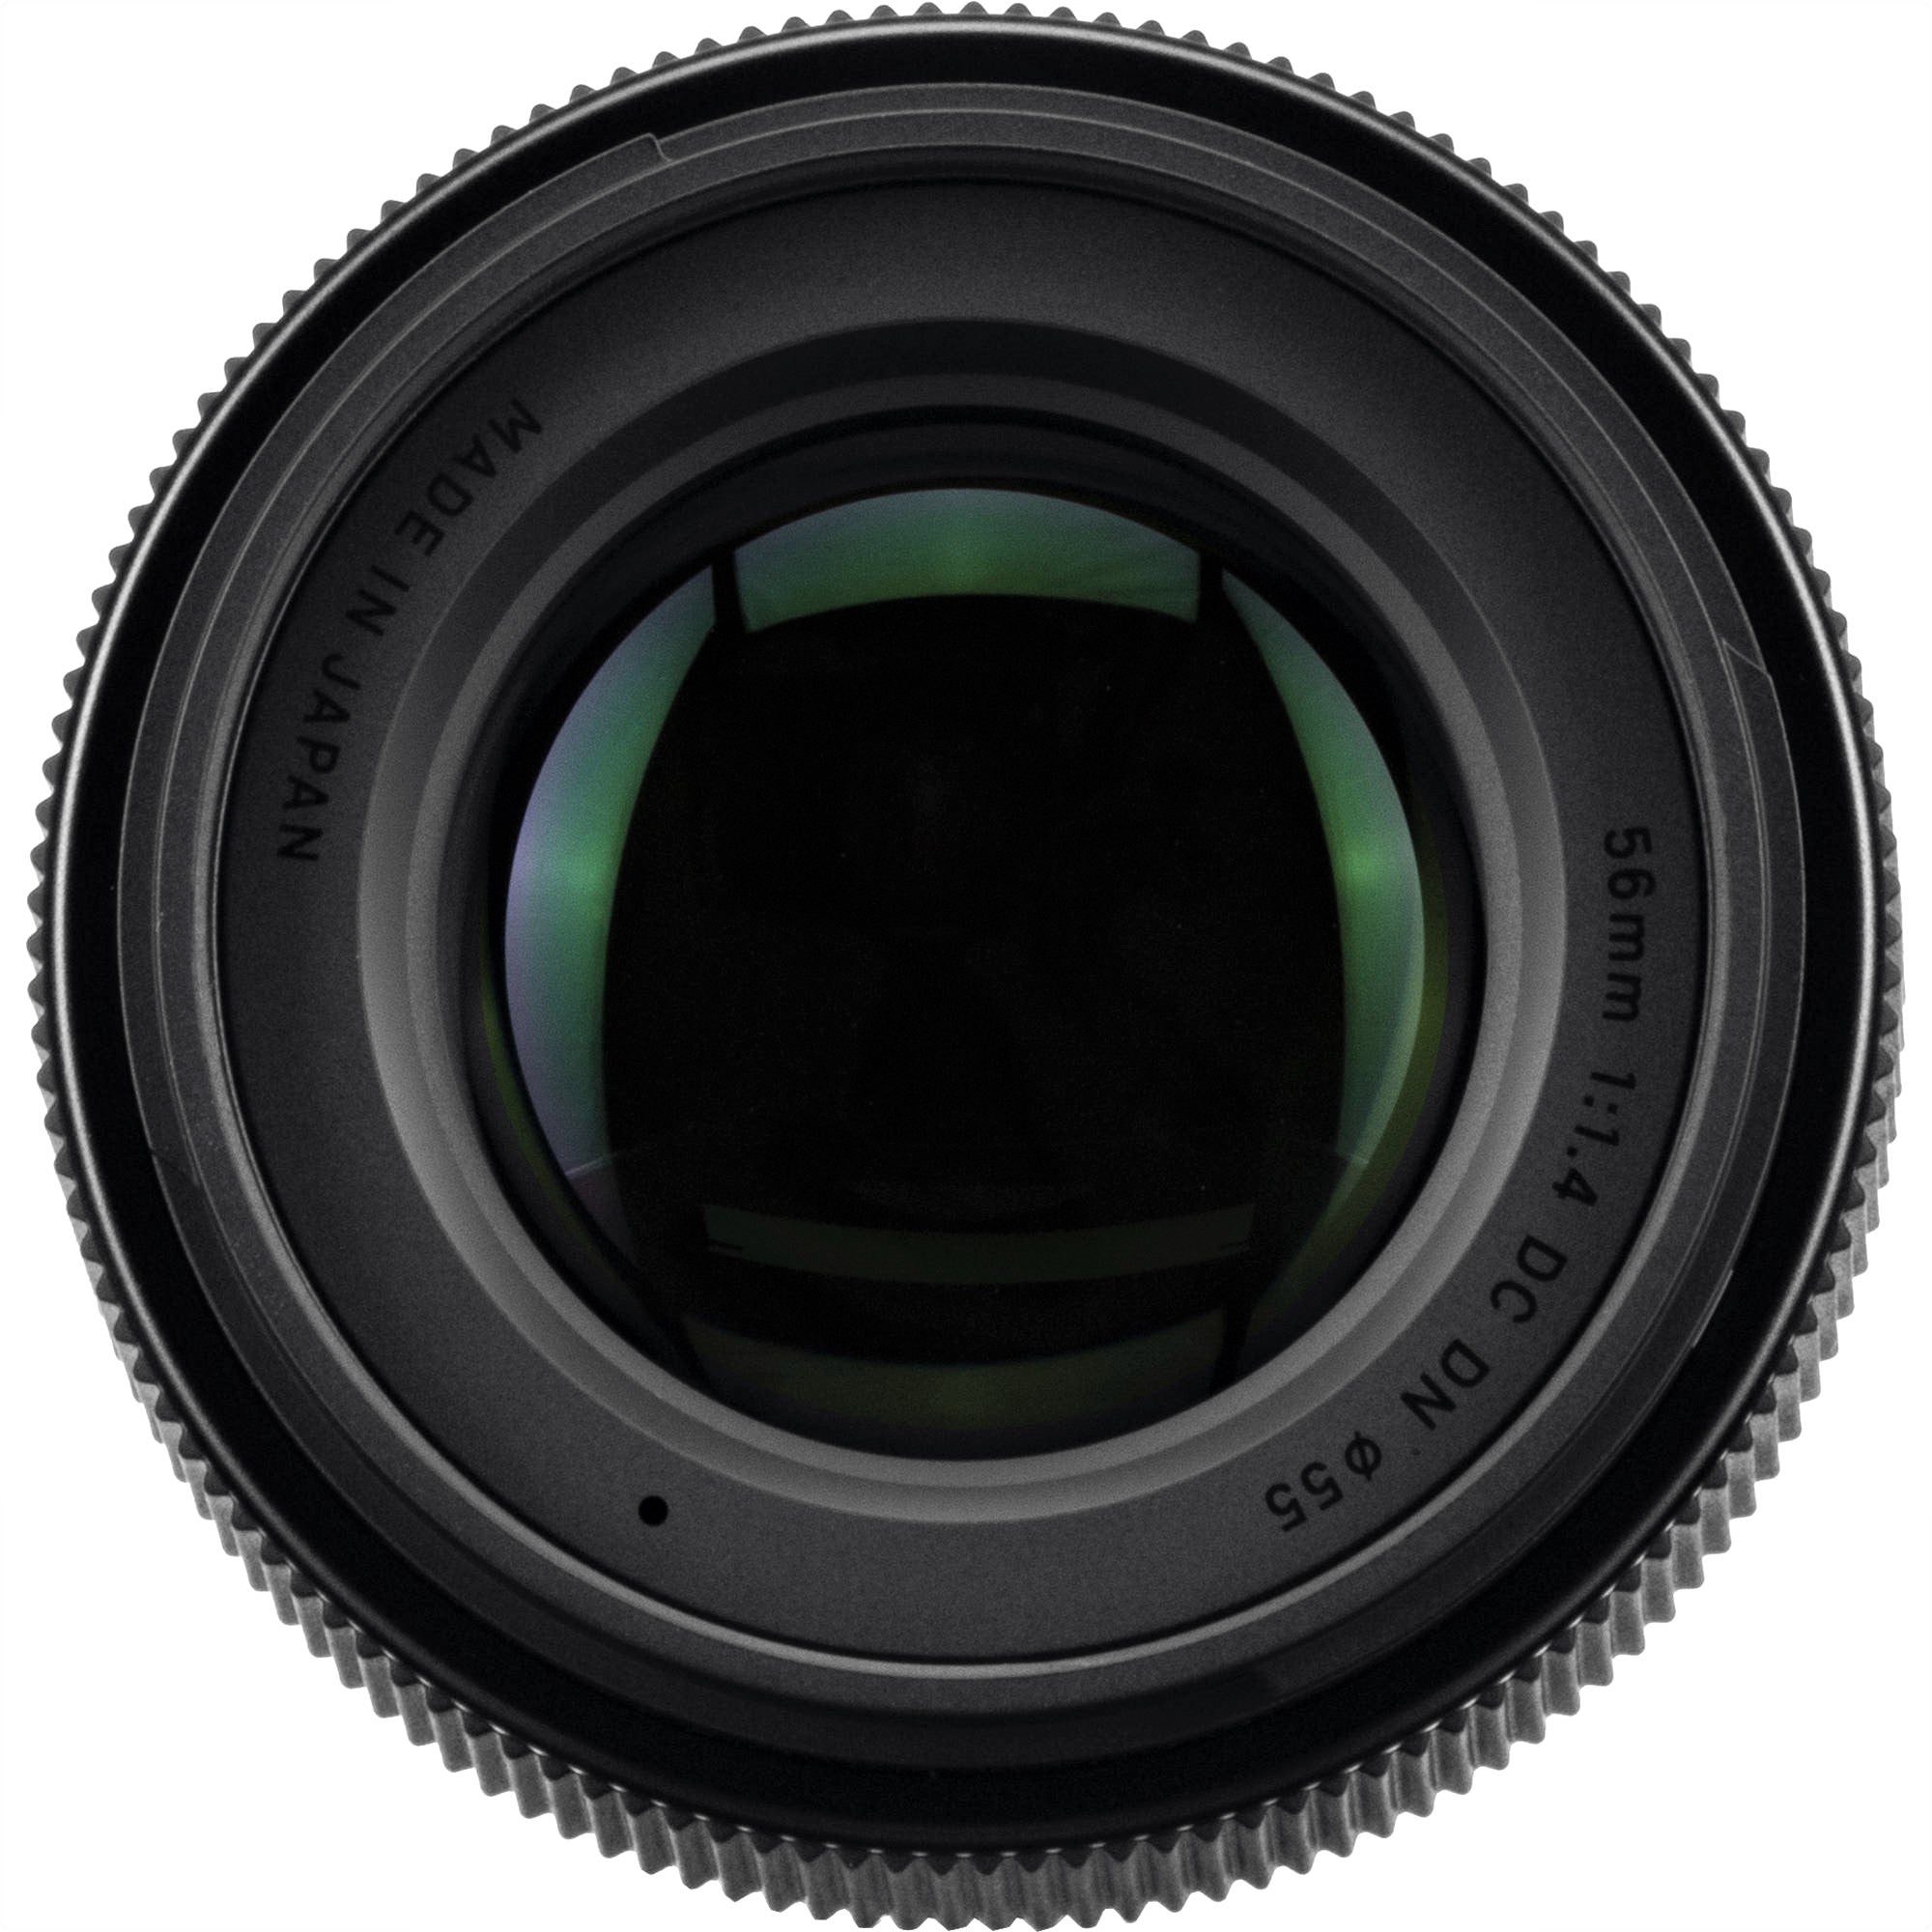 Sigma 56mm F1.4 DC DN Contemporary Lens (Nikon Z) - Front View